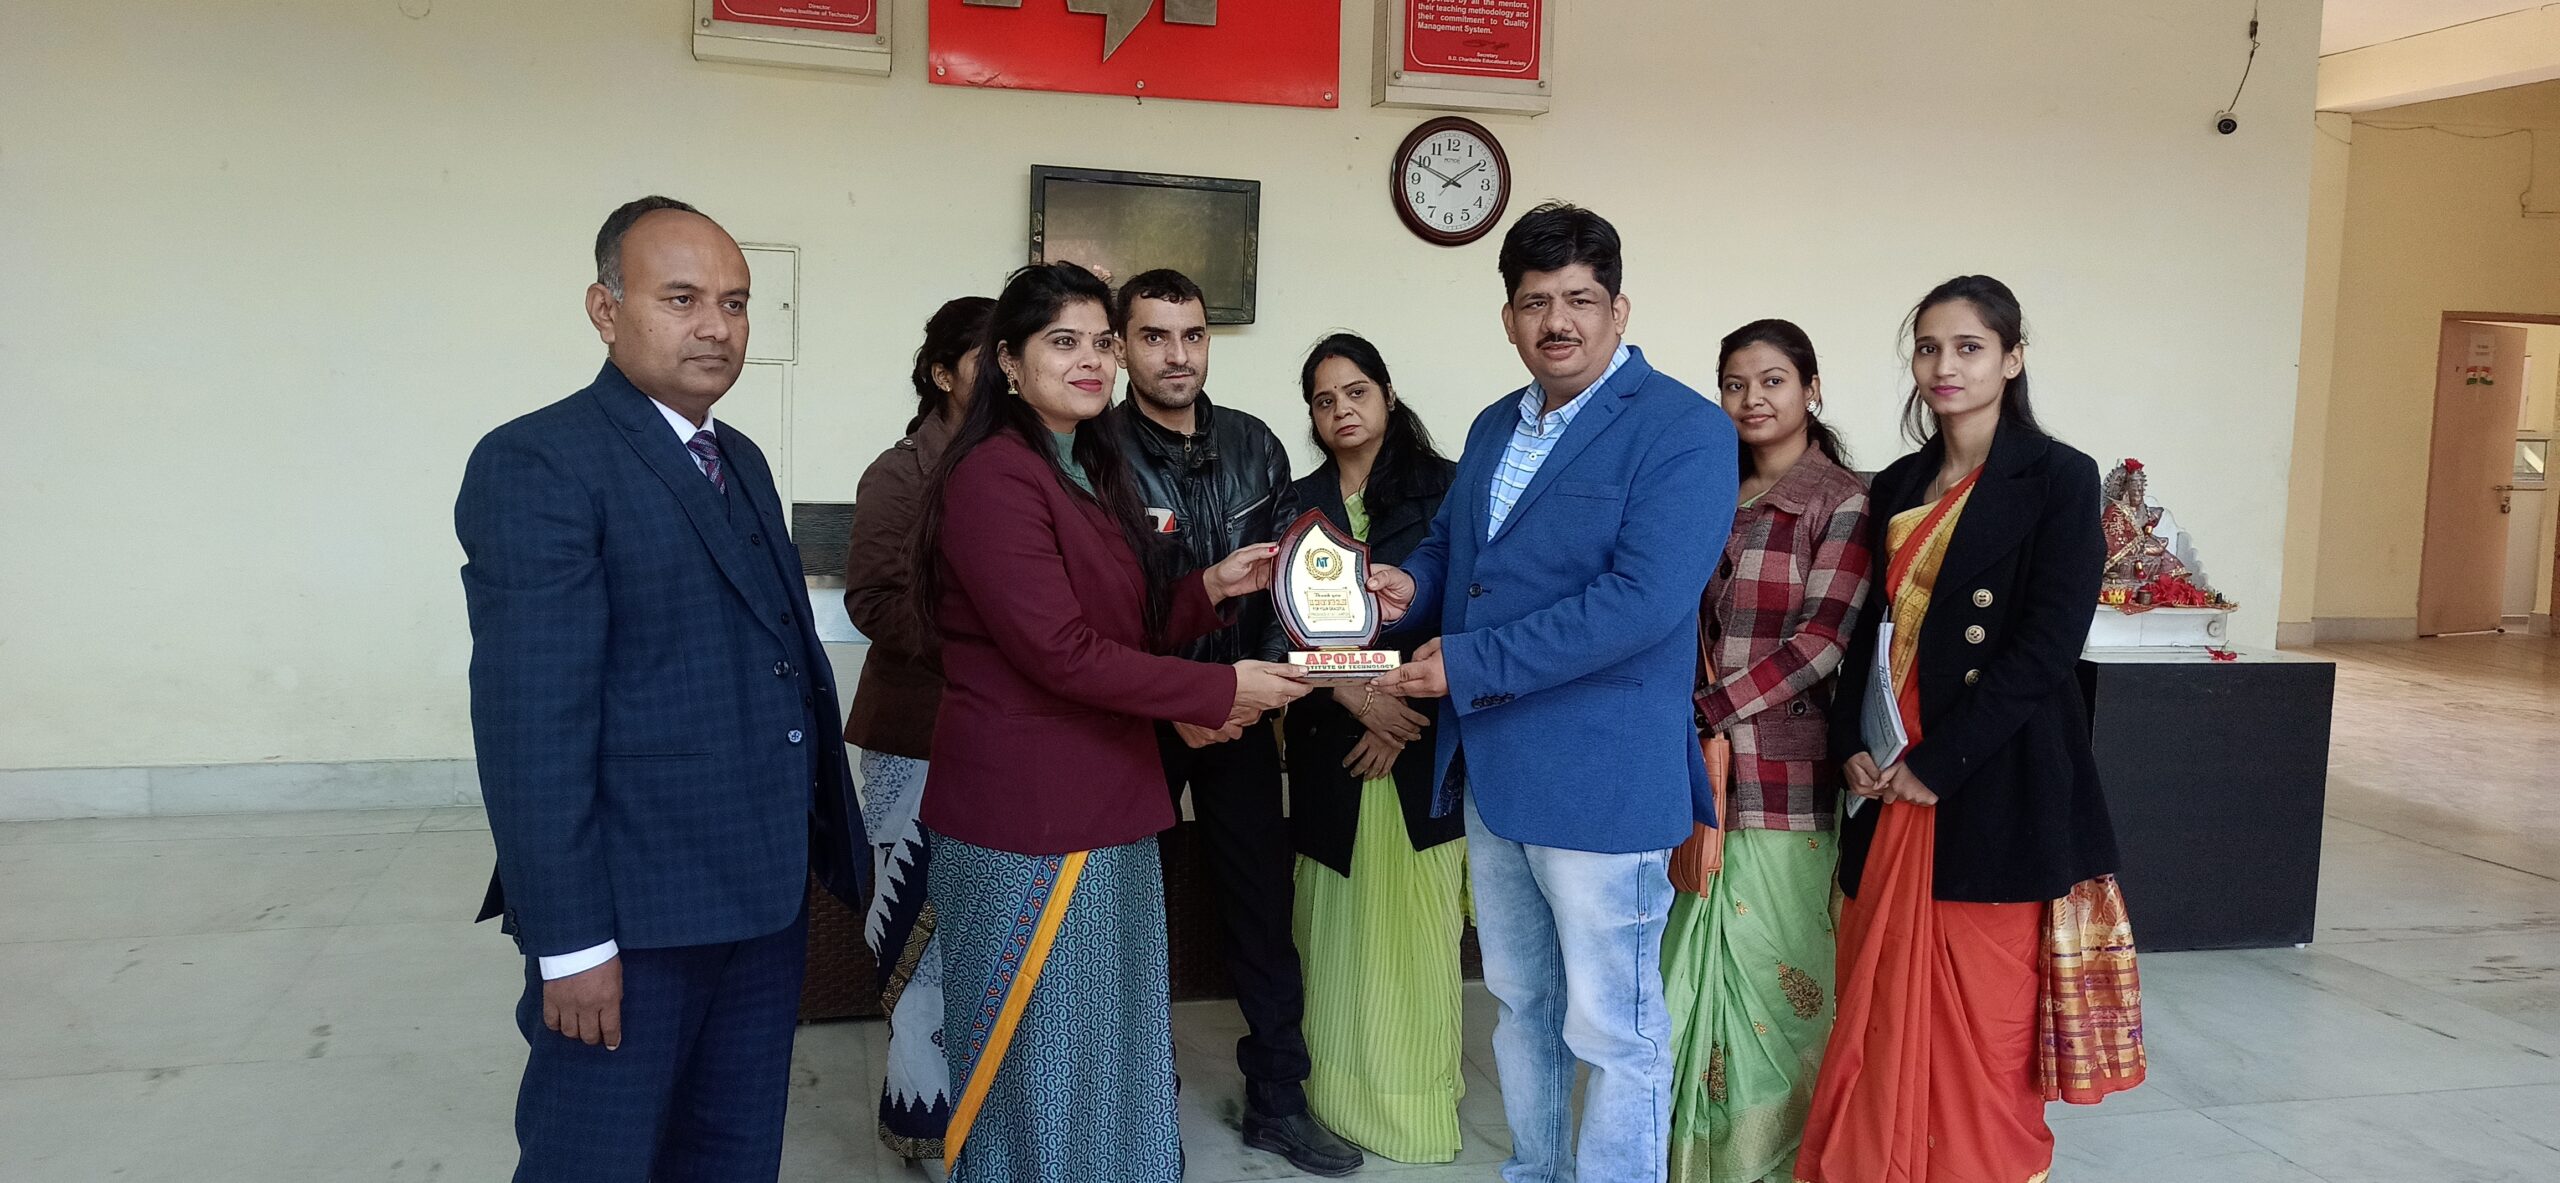 ODDESEY- School Visit by “NEW ASHA GIRLS INTER COLLEGE” & “G.S. CONVENT INTER COLLEGE”